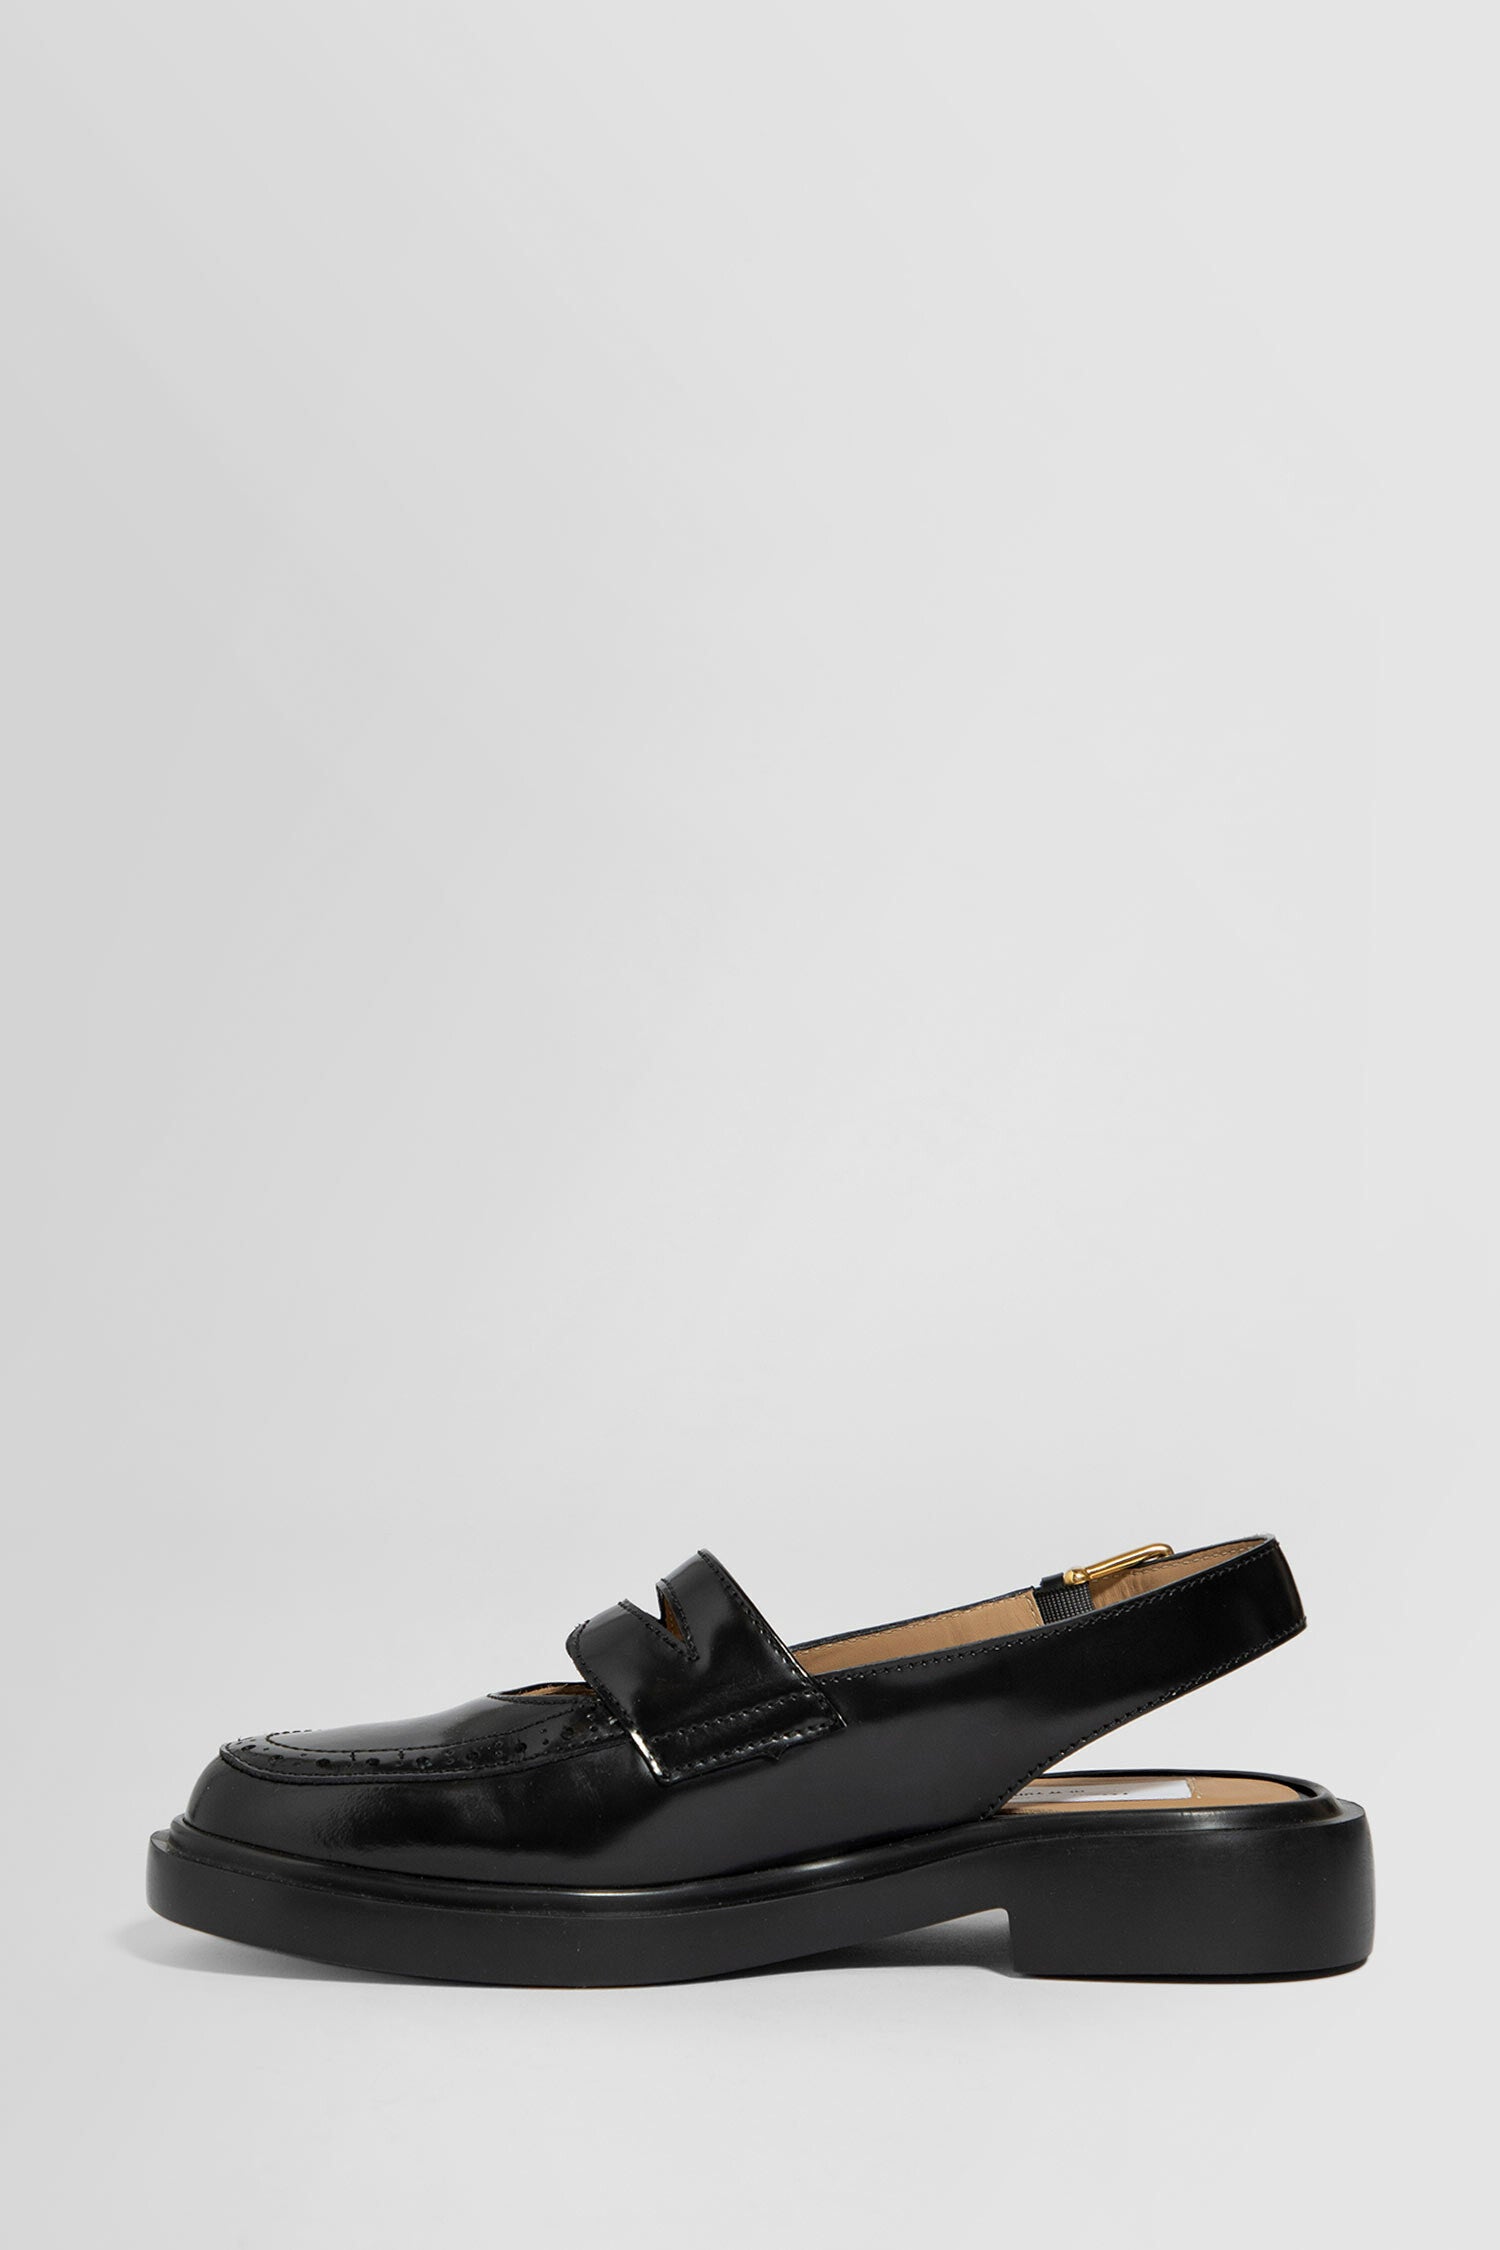 THOM BROWNE WOMAN BLACK LOAFERS & FLATS